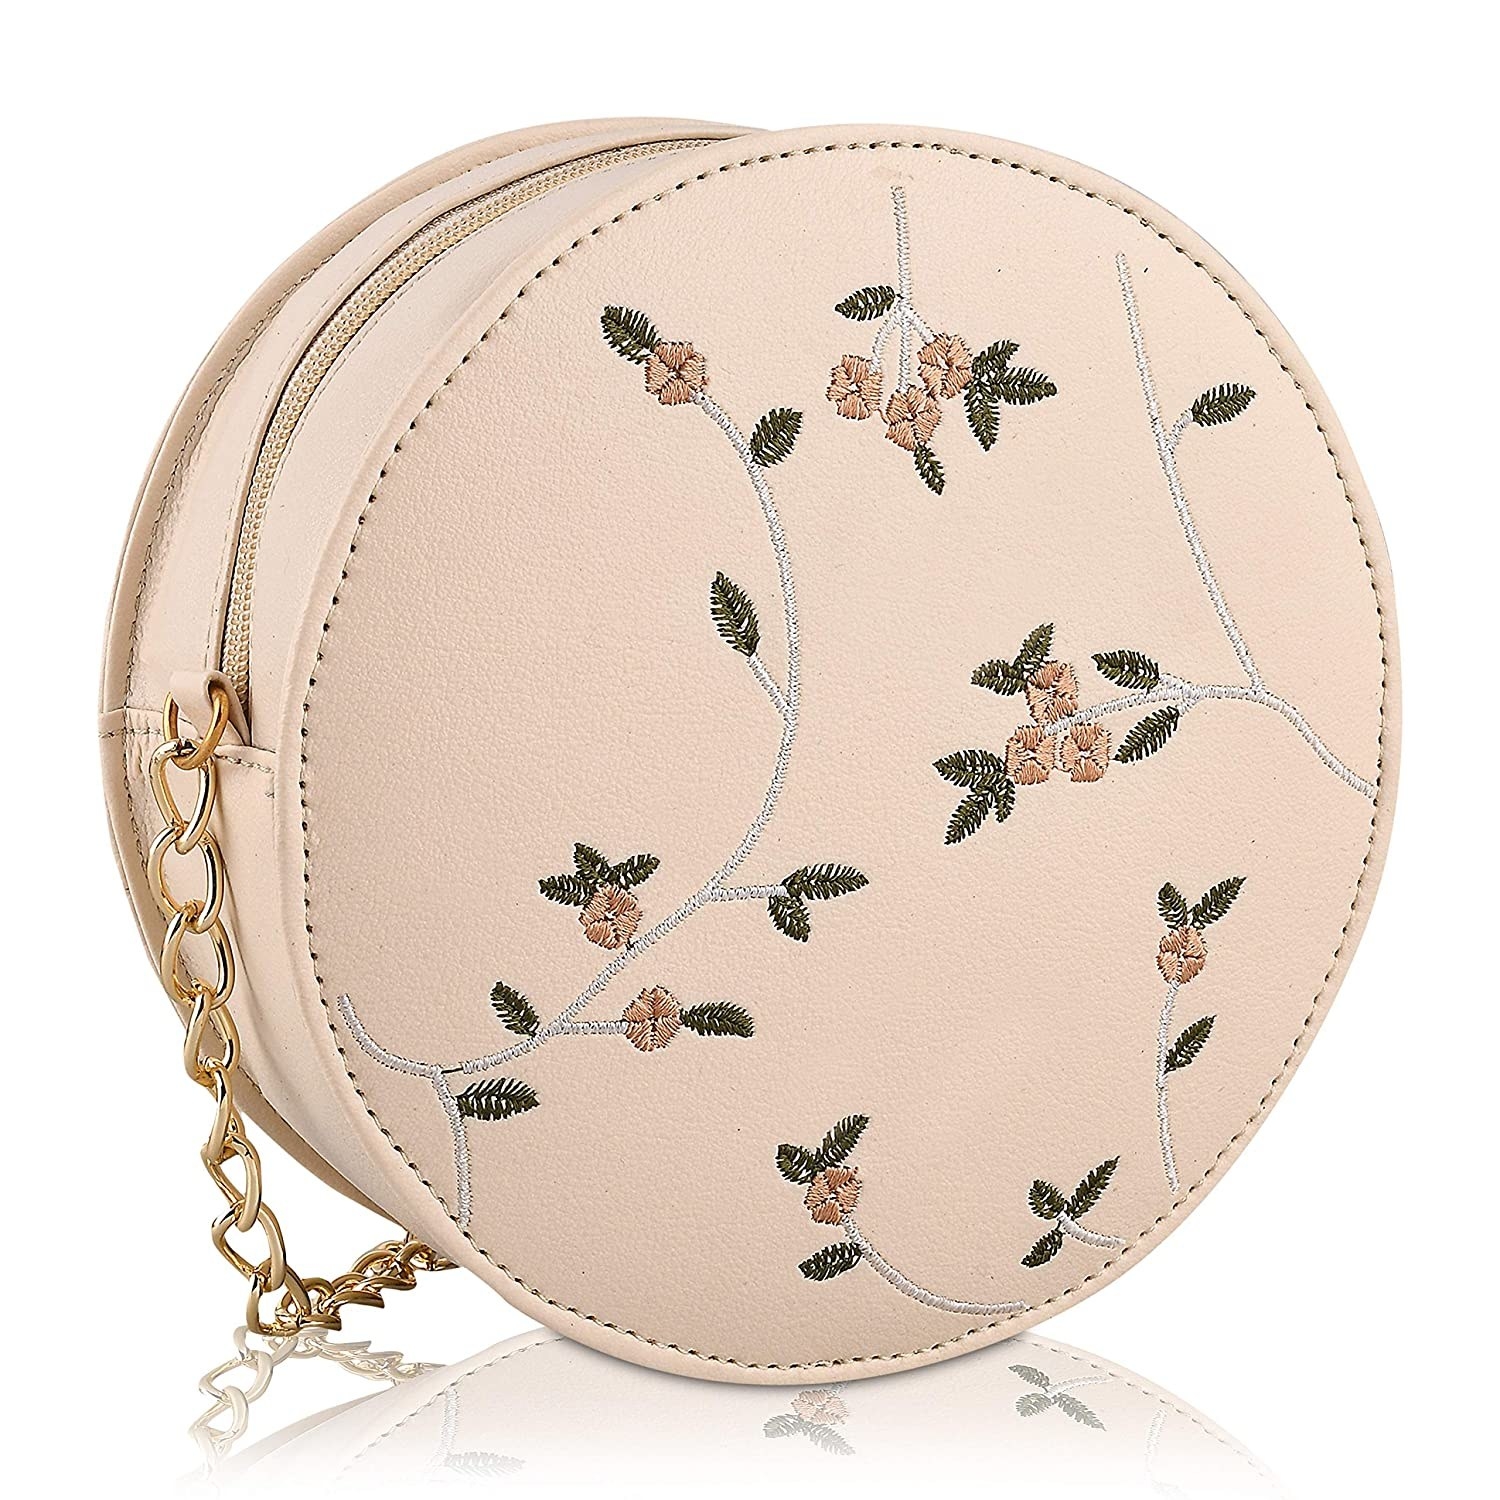 A round beige sling bag with floral embroidery and metal chain strap in gold